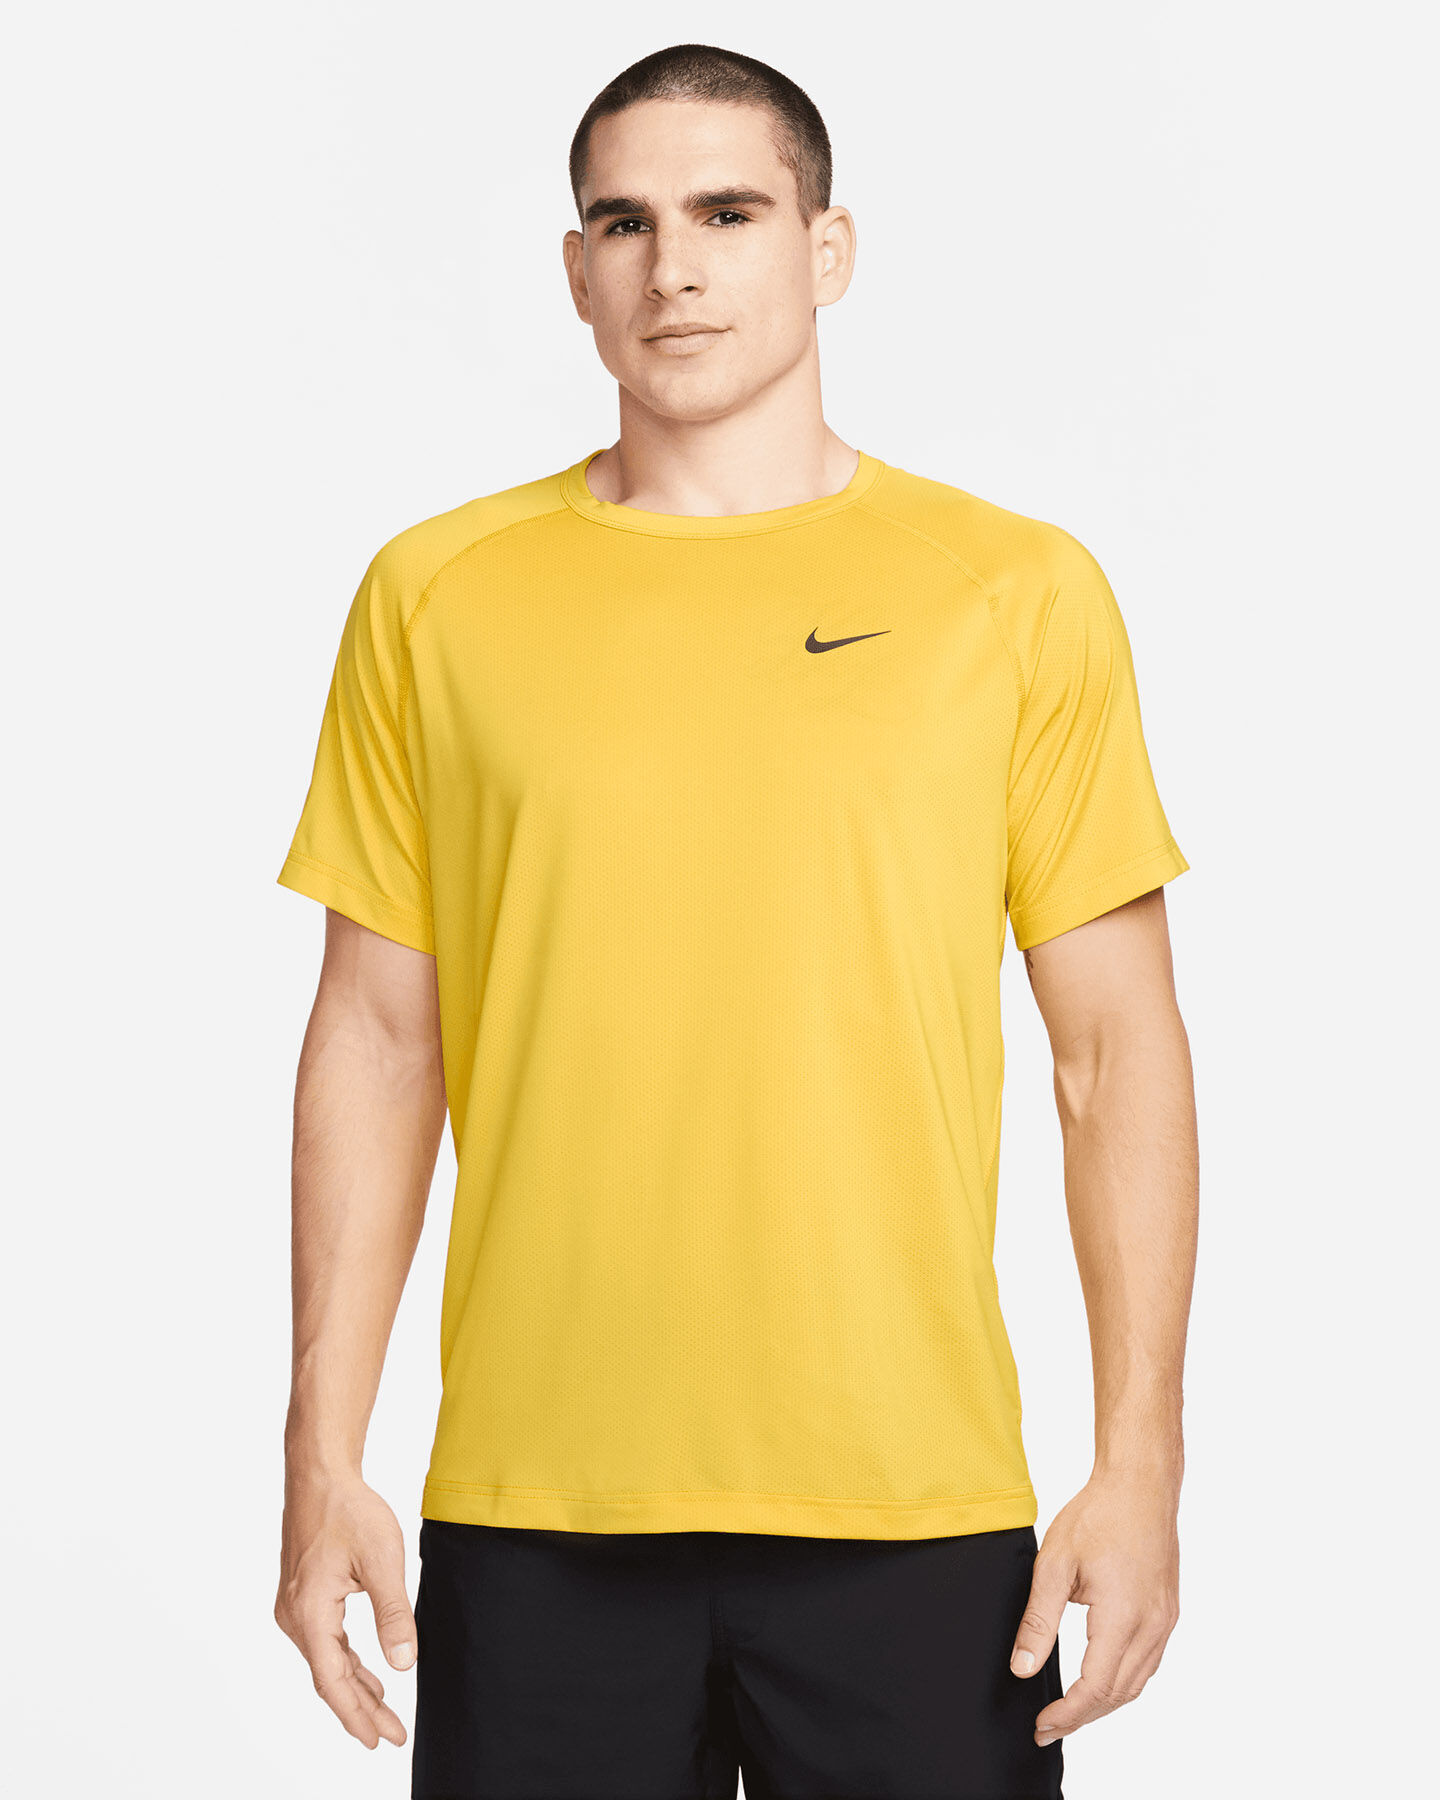  T-Shirt training NIKE DRI FIT READY M S5587046|709|S scatto 0